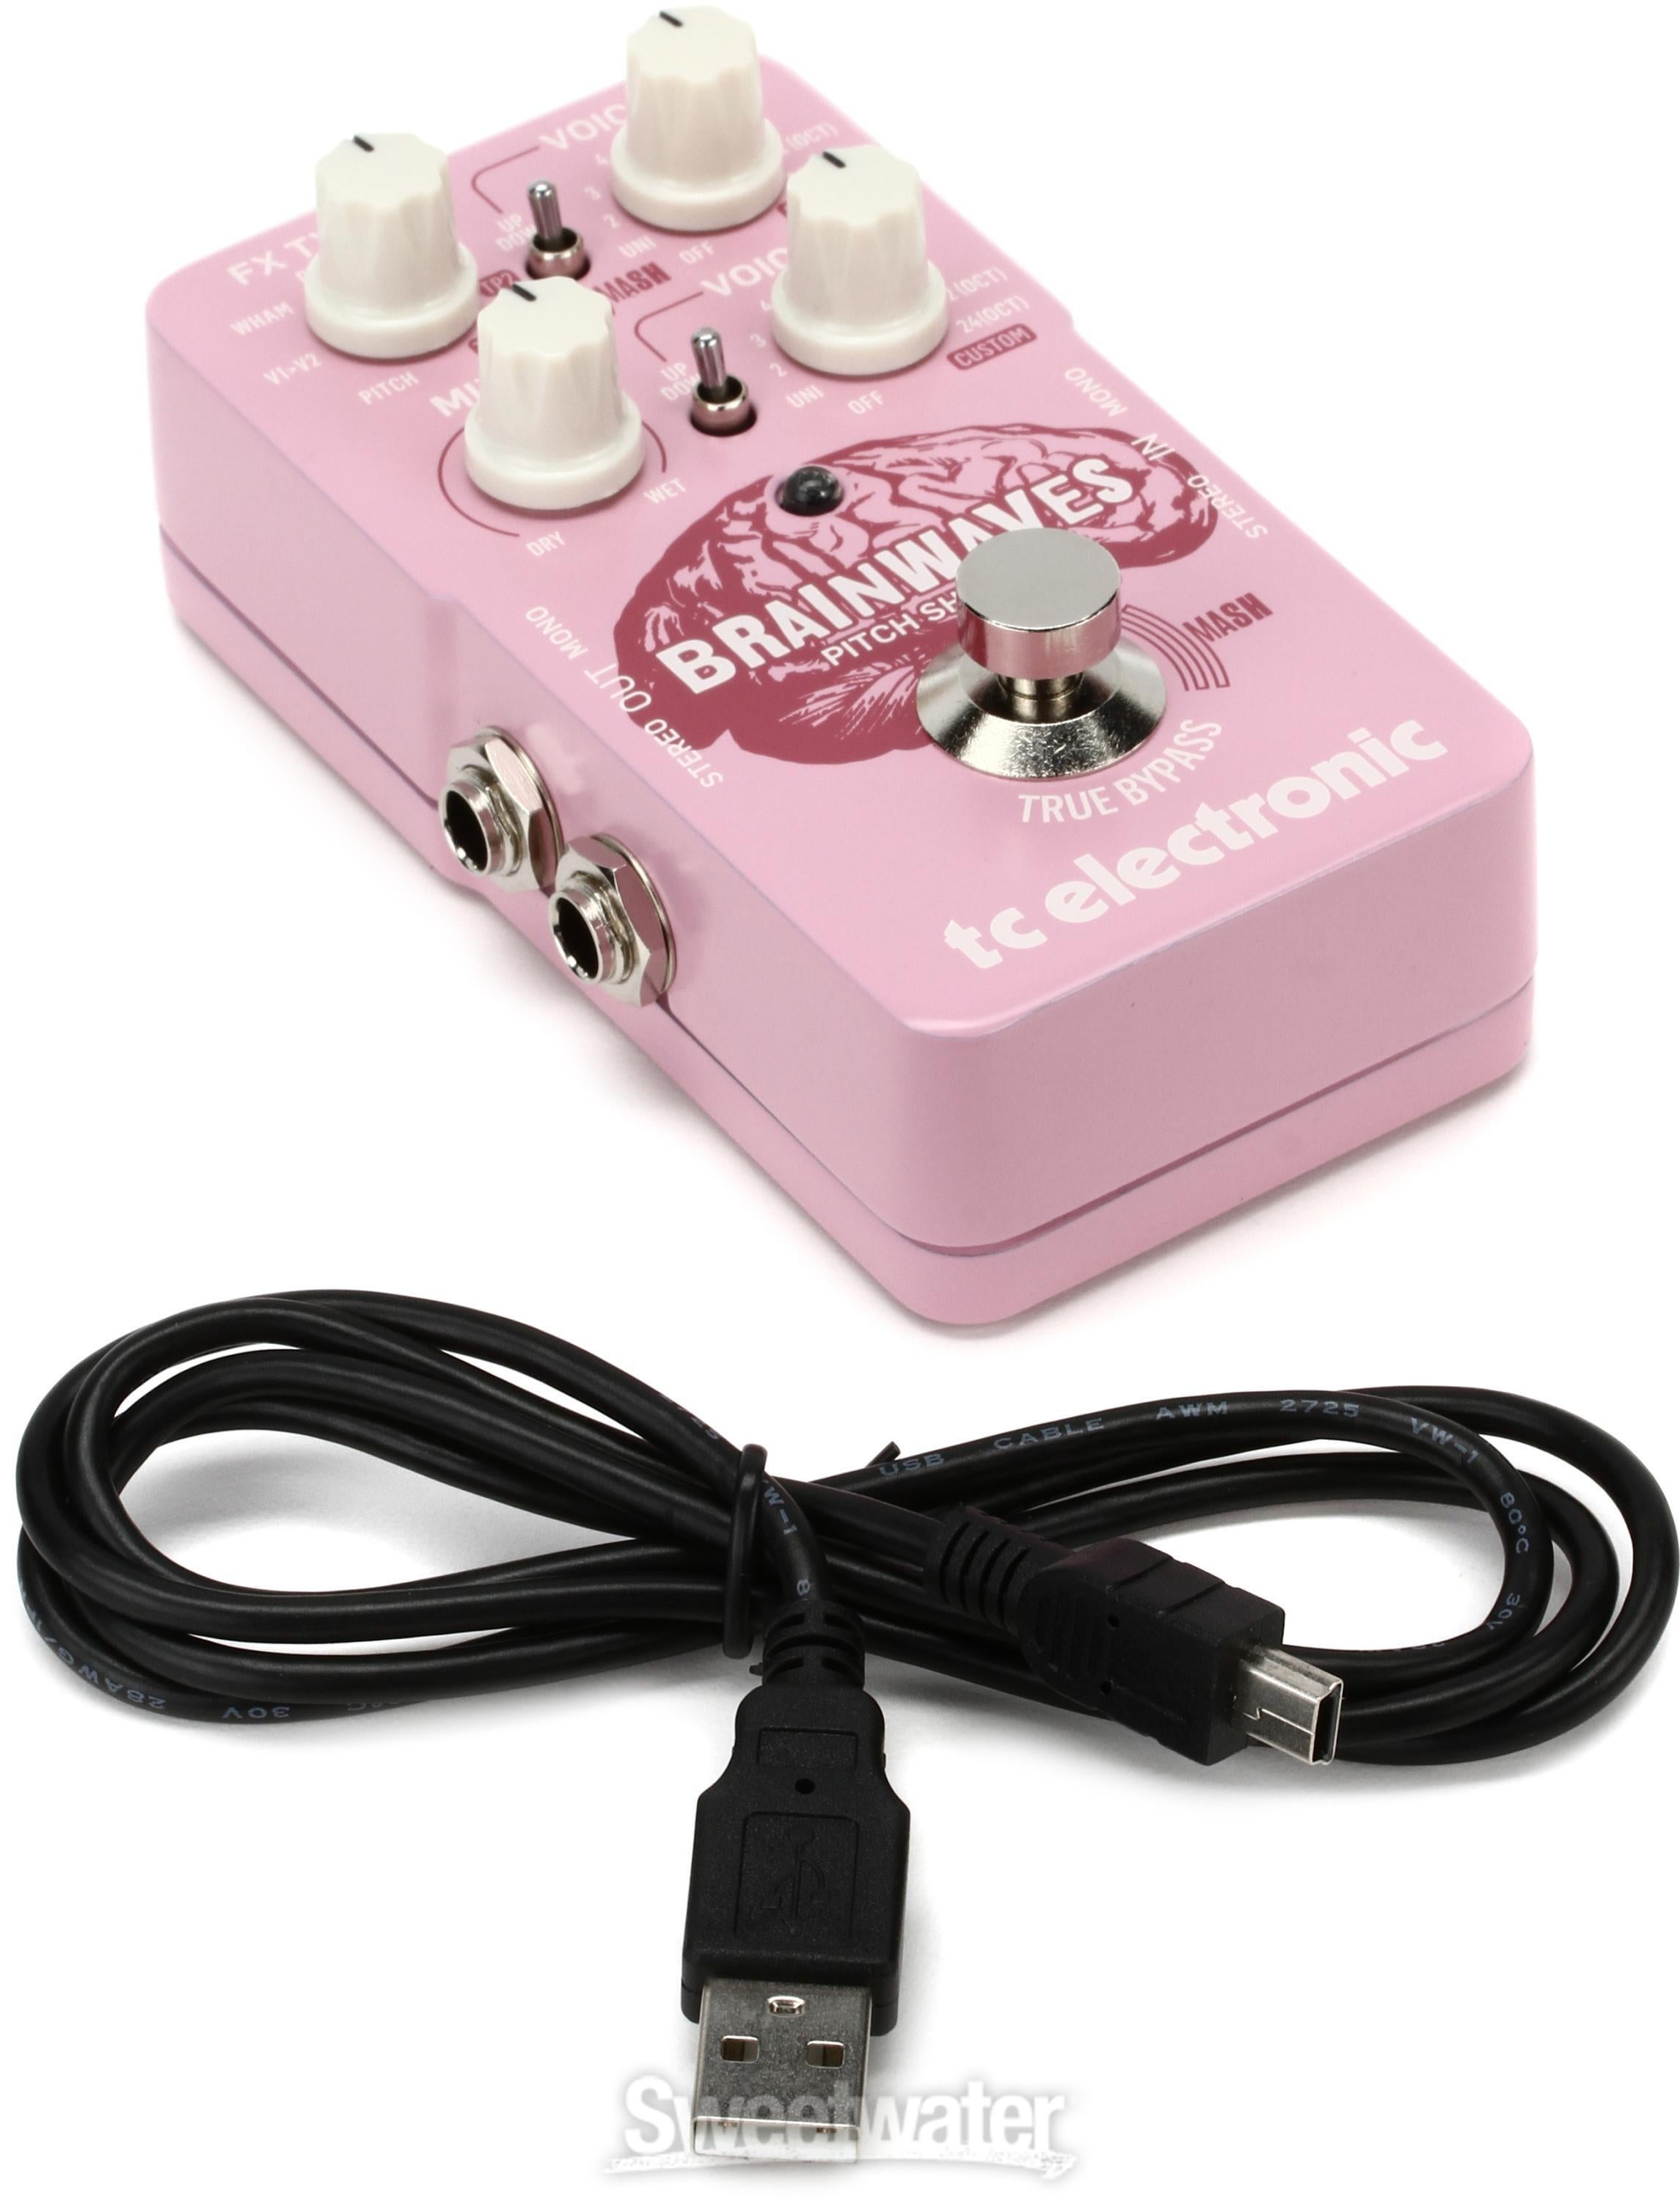 TC Electronic Brainwaves Pitch Shifter Pedal Reviews | Sweetwater